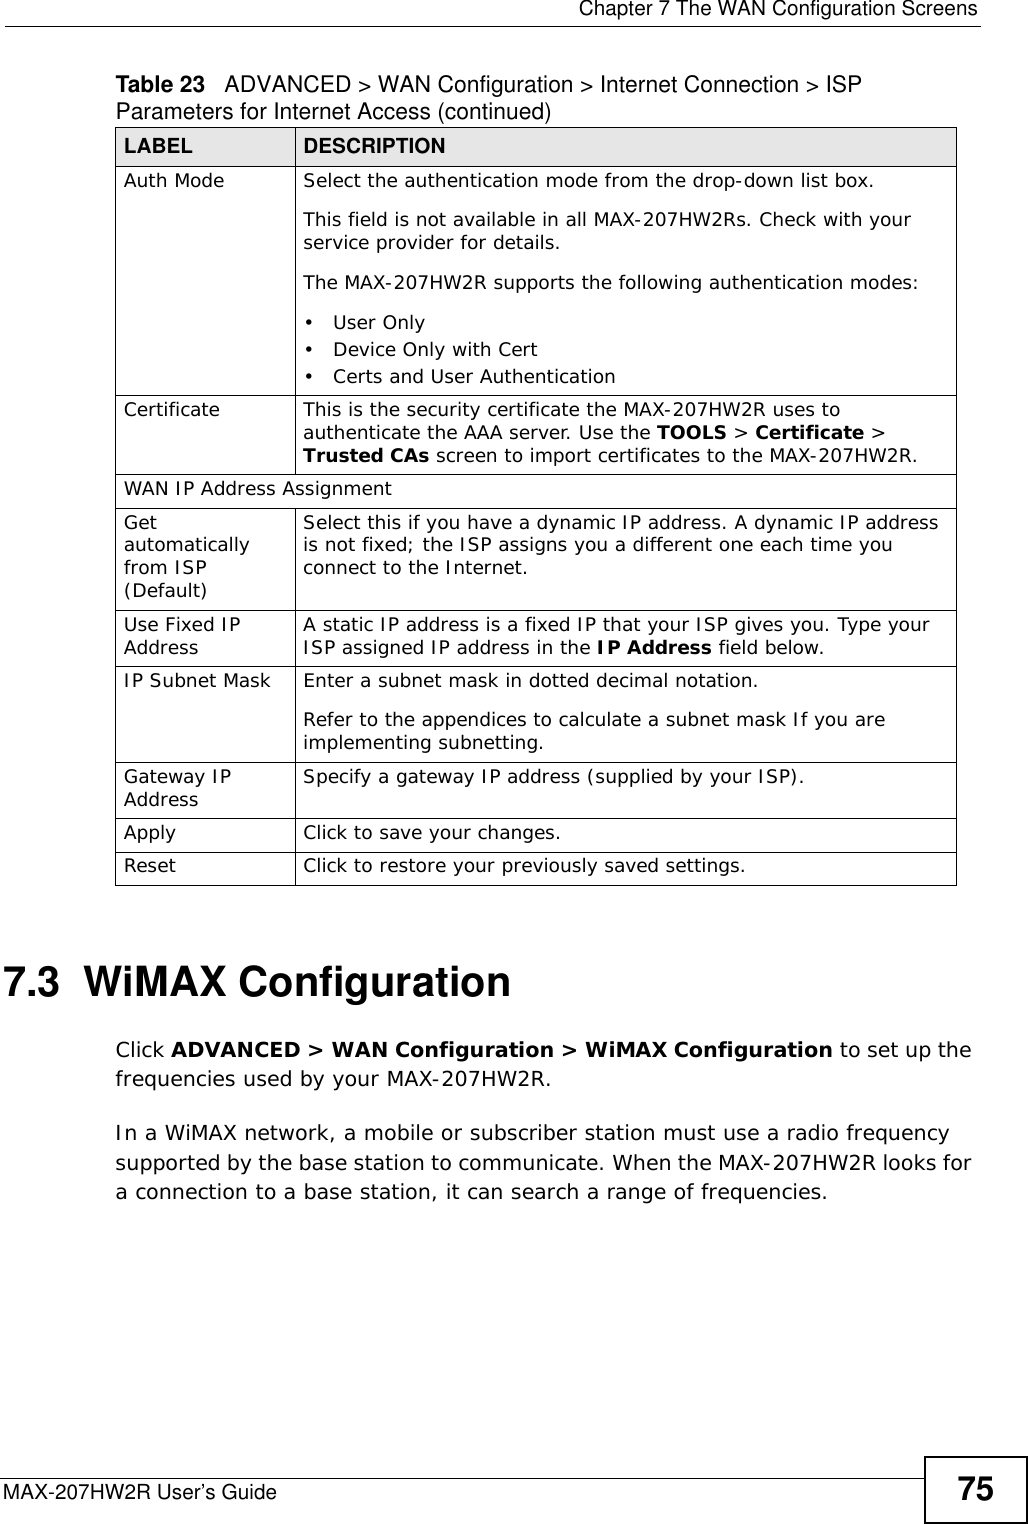  Chapter 7 The WAN Configuration ScreensMAX-207HW2R User’s Guide 757.3  WiMAX ConfigurationClick ADVANCED &gt; WAN Configuration &gt; WiMAX Configuration to set up the frequencies used by your MAX-207HW2R.In a WiMAX network, a mobile or subscriber station must use a radio frequency supported by the base station to communicate. When the MAX-207HW2R looks for a connection to a base station, it can search a range of frequencies.Auth Mode  Select the authentication mode from the drop-down list box.This field is not available in all MAX-207HW2Rs. Check with your service provider for details.The MAX-207HW2R supports the following authentication modes:•User Only• Device Only with Cert• Certs and User AuthenticationCertificate This is the security certificate the MAX-207HW2R uses to authenticate the AAA server. Use the TOOLS &gt; Certificate &gt; Trusted CAs screen to import certificates to the MAX-207HW2R.WAN IP Address AssignmentGet automatically from ISP (Default)Select this if you have a dynamic IP address. A dynamic IP address is not fixed; the ISP assigns you a different one each time you connect to the Internet. Use Fixed IP Address  A static IP address is a fixed IP that your ISP gives you. Type your ISP assigned IP address in the IP Address field below. IP Subnet Mask  Enter a subnet mask in dotted decimal notation. Refer to the appendices to calculate a subnet mask If you are implementing subnetting.Gateway IP Address Specify a gateway IP address (supplied by your ISP).Apply Click to save your changes.Reset Click to restore your previously saved settings.Table 23   ADVANCED &gt; WAN Configuration &gt; Internet Connection &gt; ISP Parameters for Internet Access (continued)LABEL DESCRIPTION